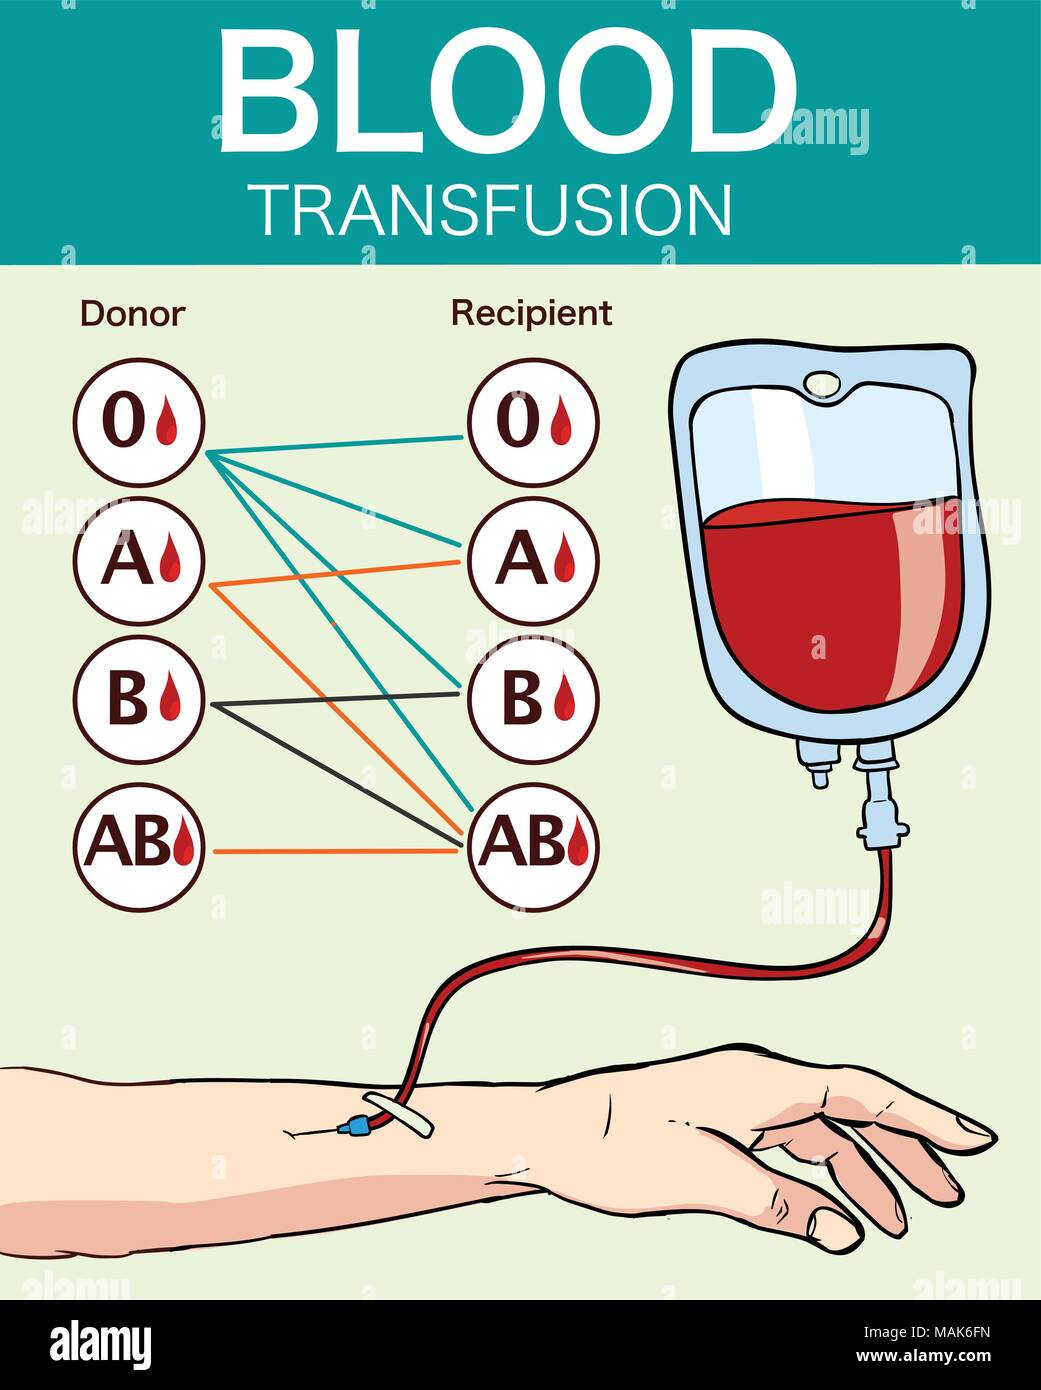 VECTOR ILLUSTRATION OF A BLOOD  TRANSFUSION Stock Vector